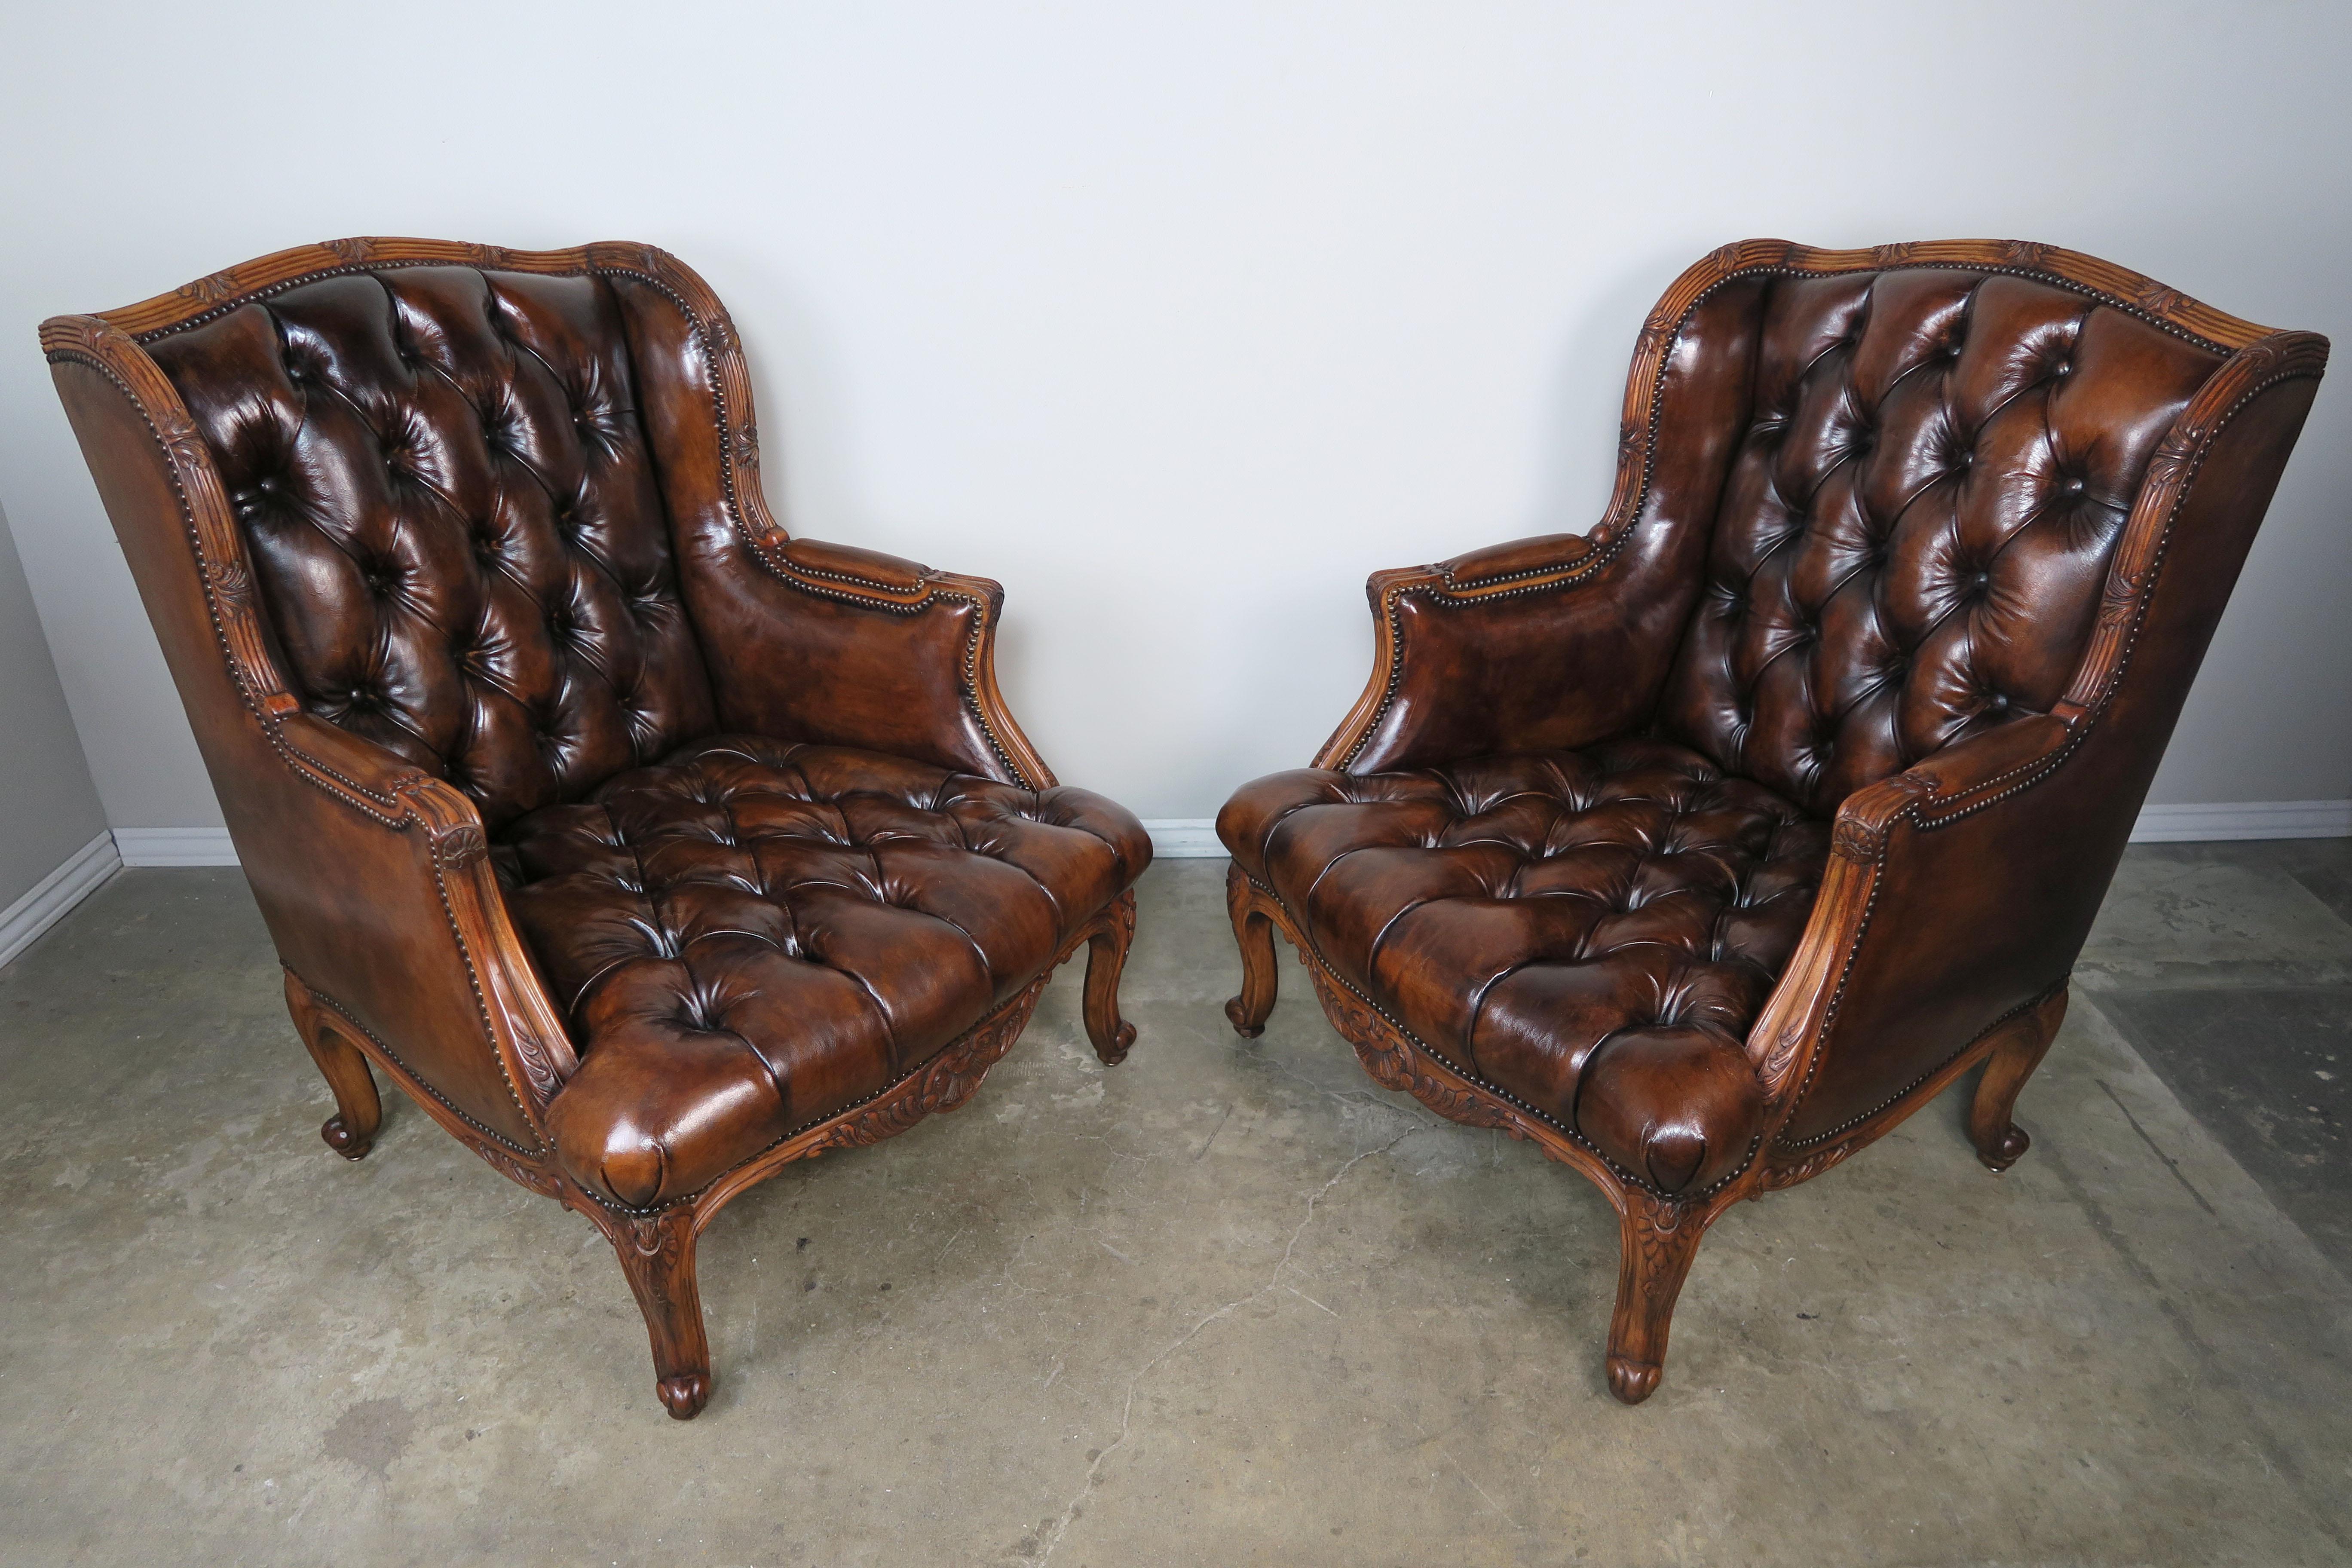 Brass Pair of French Leather Tufted Armchairs with Matching Ottomans